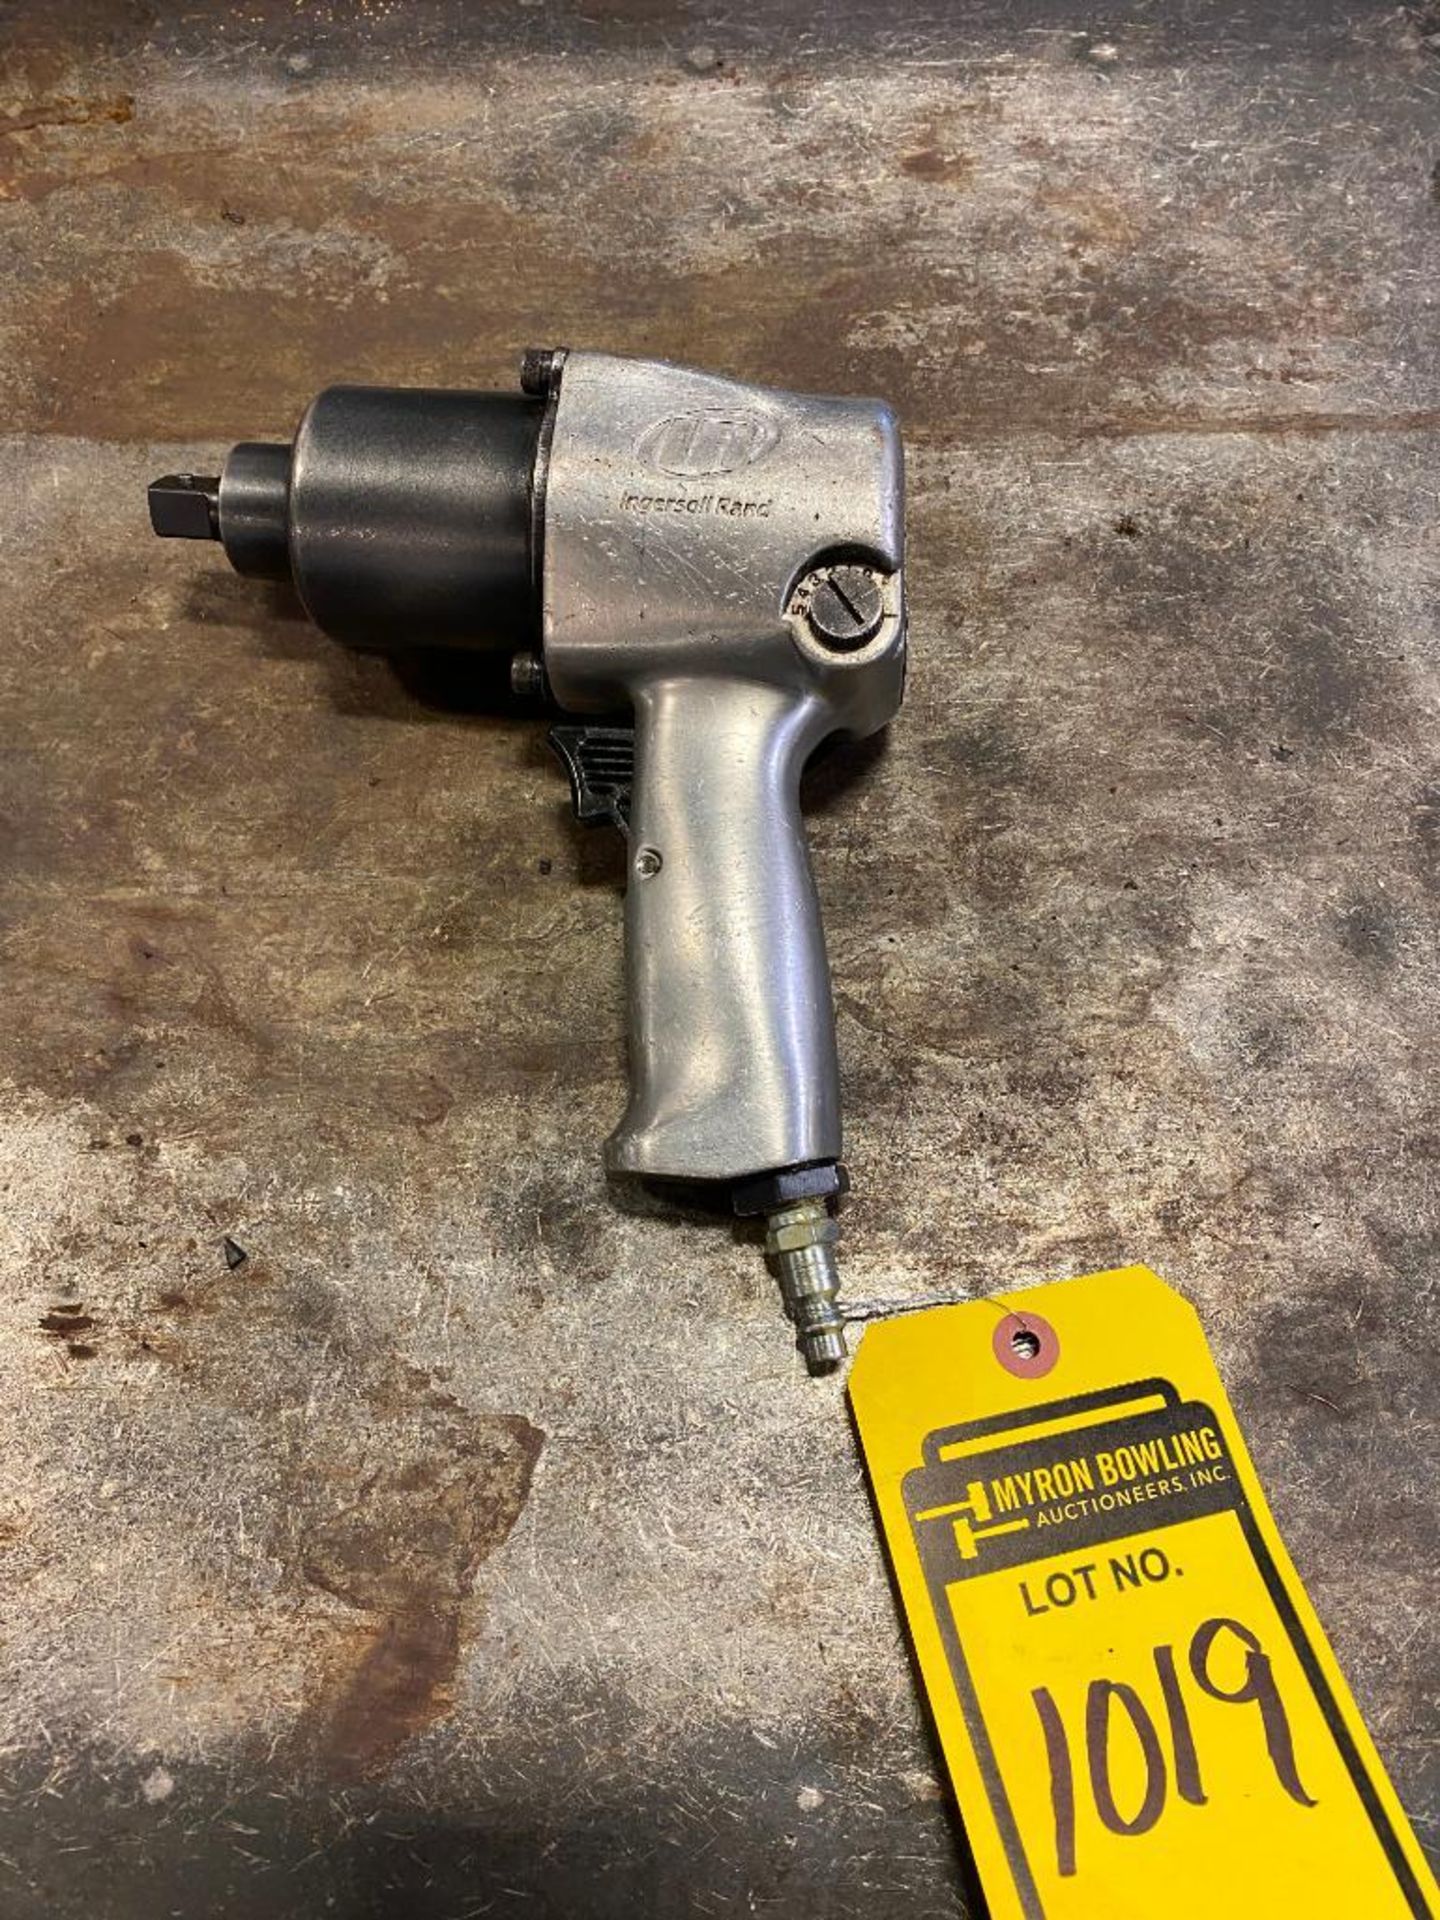 Ingersoll Rand 1/2" pneumatic impact wrench